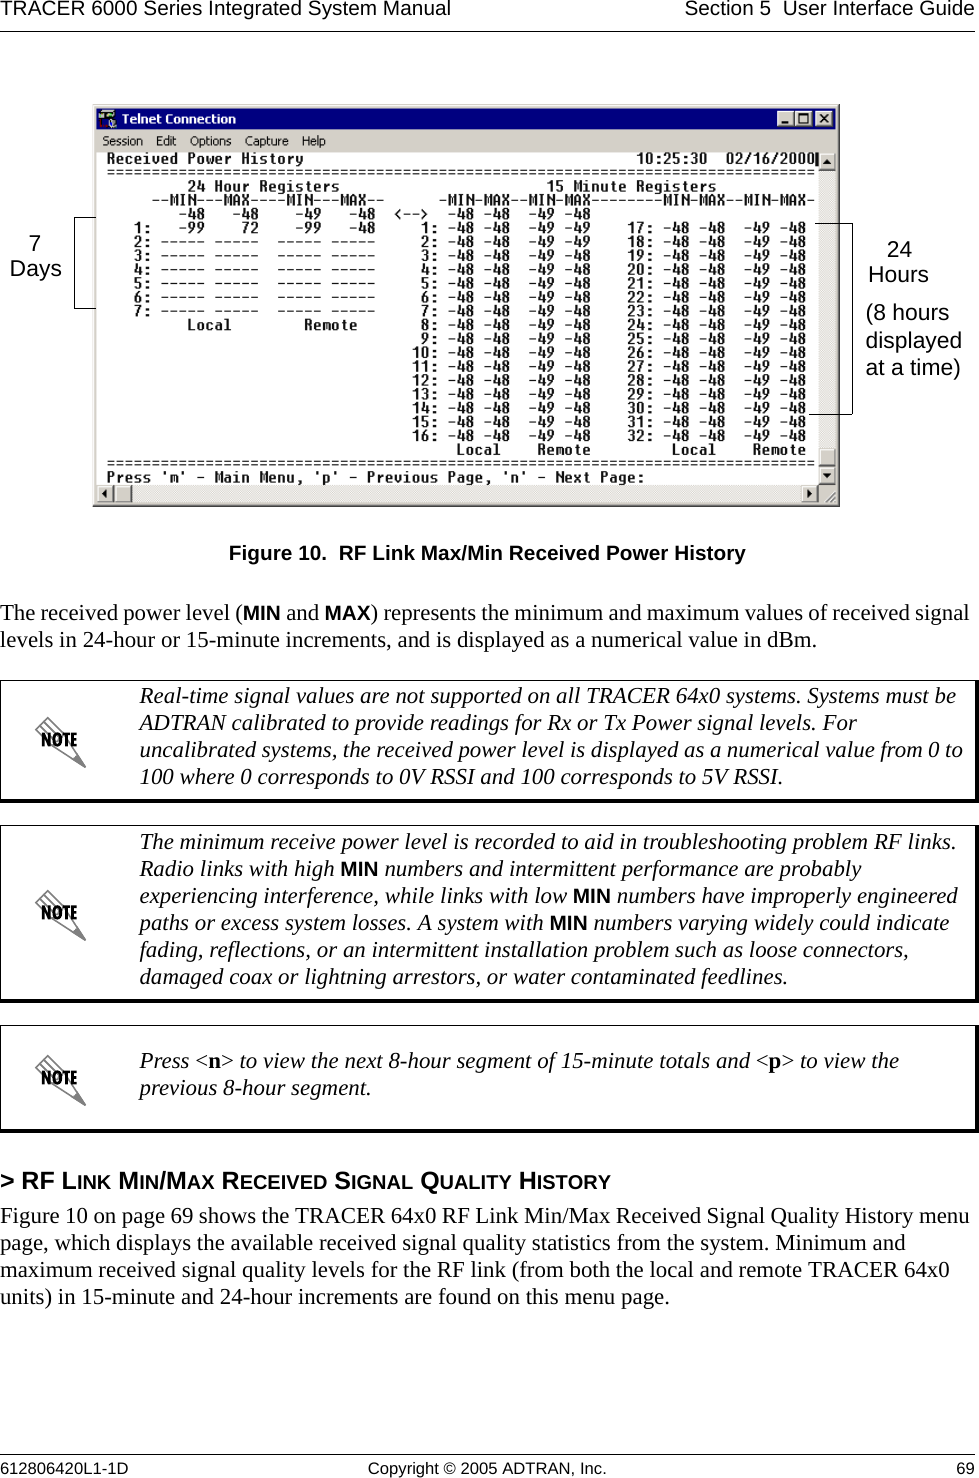 TRACER 6000 Series Integrated System Manual Section 5  User Interface Guide612806420L1-1D Copyright © 2005 ADTRAN, Inc. 69Figure 10.  RF Link Max/Min Received Power HistoryThe received power level (MIN and MAX) represents the minimum and maximum values of received signal levels in 24-hour or 15-minute increments, and is displayed as a numerical value in dBm.&gt; RF LINK MIN/MAX RECEIVED SIGNAL QUALITY HISTORYFigure 10 on page 69 shows the TRACER 64x0 RF Link Min/Max Received Signal Quality History menu page, which displays the available received signal quality statistics from the system. Minimum and maximum received signal quality levels for the RF link (from both the local and remote TRACER 64x0 units) in 15-minute and 24-hour increments are found on this menu page.Real-time signal values are not supported on all TRACER 64x0 systems. Systems must be ADTRAN calibrated to provide readings for Rx or Tx Power signal levels. For uncalibrated systems, the received power level is displayed as a numerical value from 0 to 100 where 0 corresponds to 0V RSSI and 100 corresponds to 5V RSSI.The minimum receive power level is recorded to aid in troubleshooting problem RF links. Radio links with high MIN numbers and intermittent performance are probably experiencing interference, while links with low MIN numbers have improperly engineered paths or excess system losses. A system with MIN numbers varying widely could indicate fading, reflections, or an intermittent installation problem such as loose connectors, damaged coax or lightning arrestors, or water contaminated feedlines.Press &lt;n&gt; to view the next 8-hour segment of 15-minute totals and &lt;p&gt; to view the previous 8-hour segment.7Days 24Hours(8 hours displayed at a time)